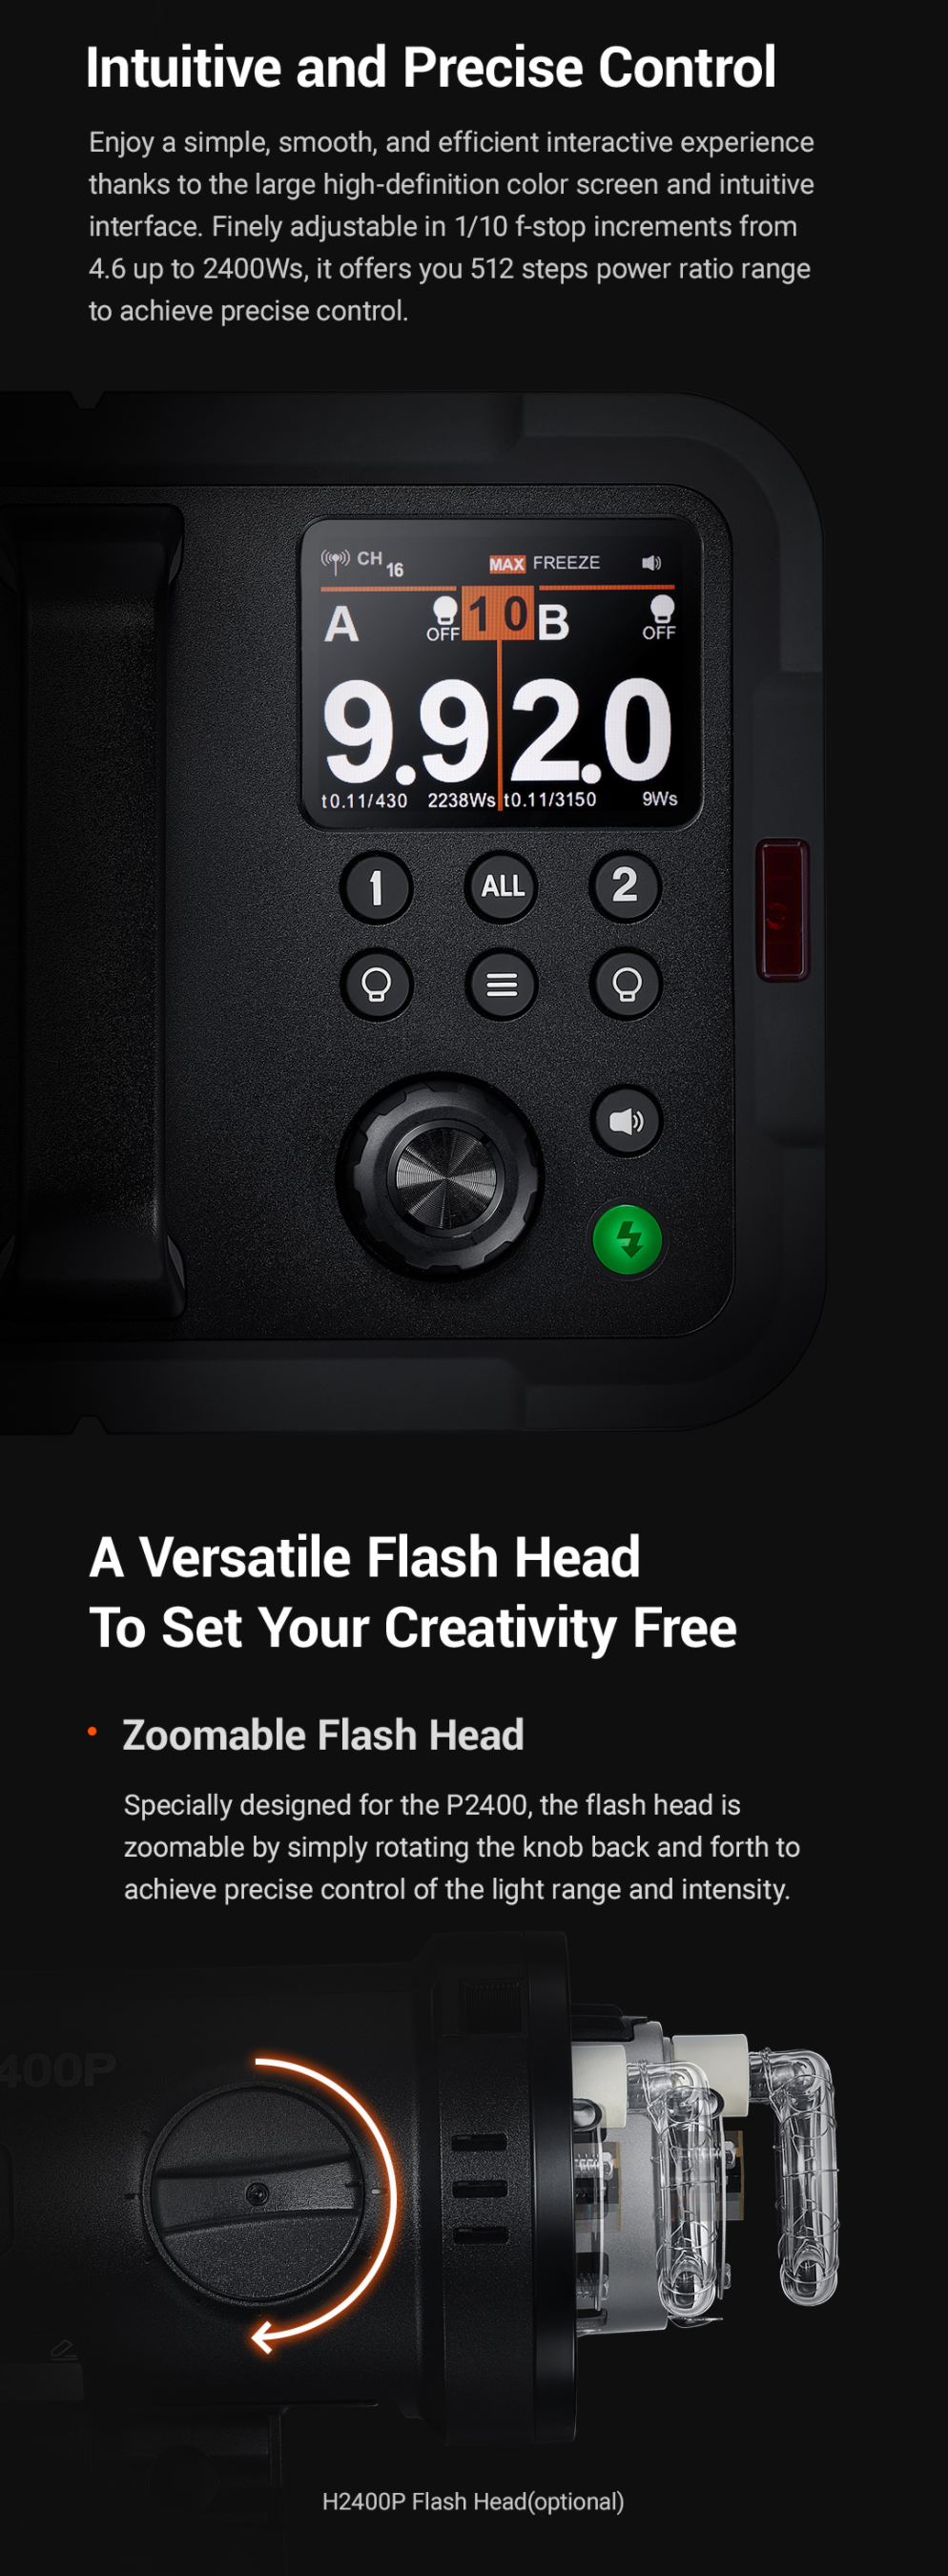 Intuitive and Precise Control Zoomable Flash Head